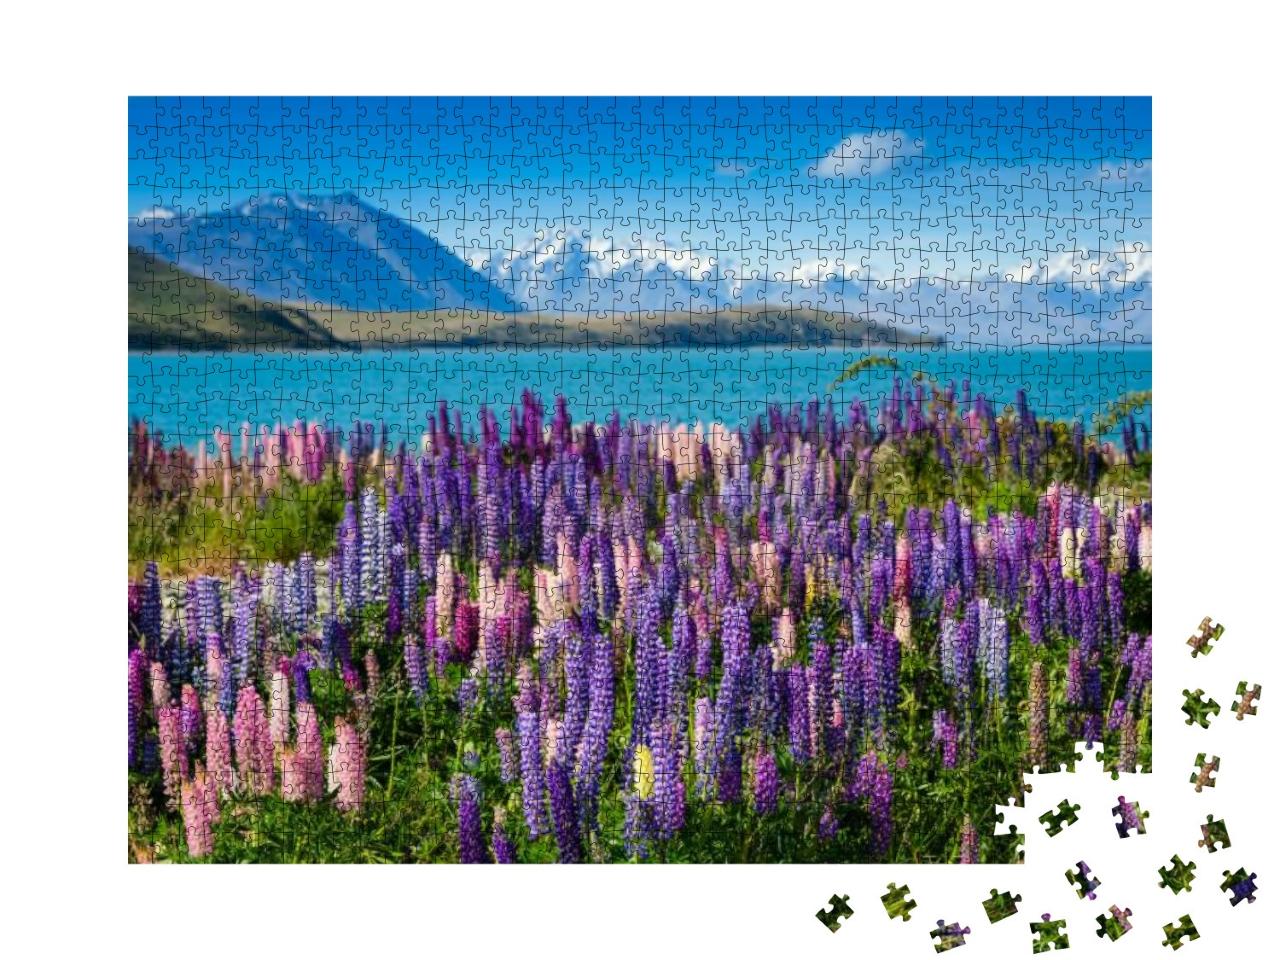 Majestic Mountain Lake with Llupins Blooming... Jigsaw Puzzle with 1000 pieces